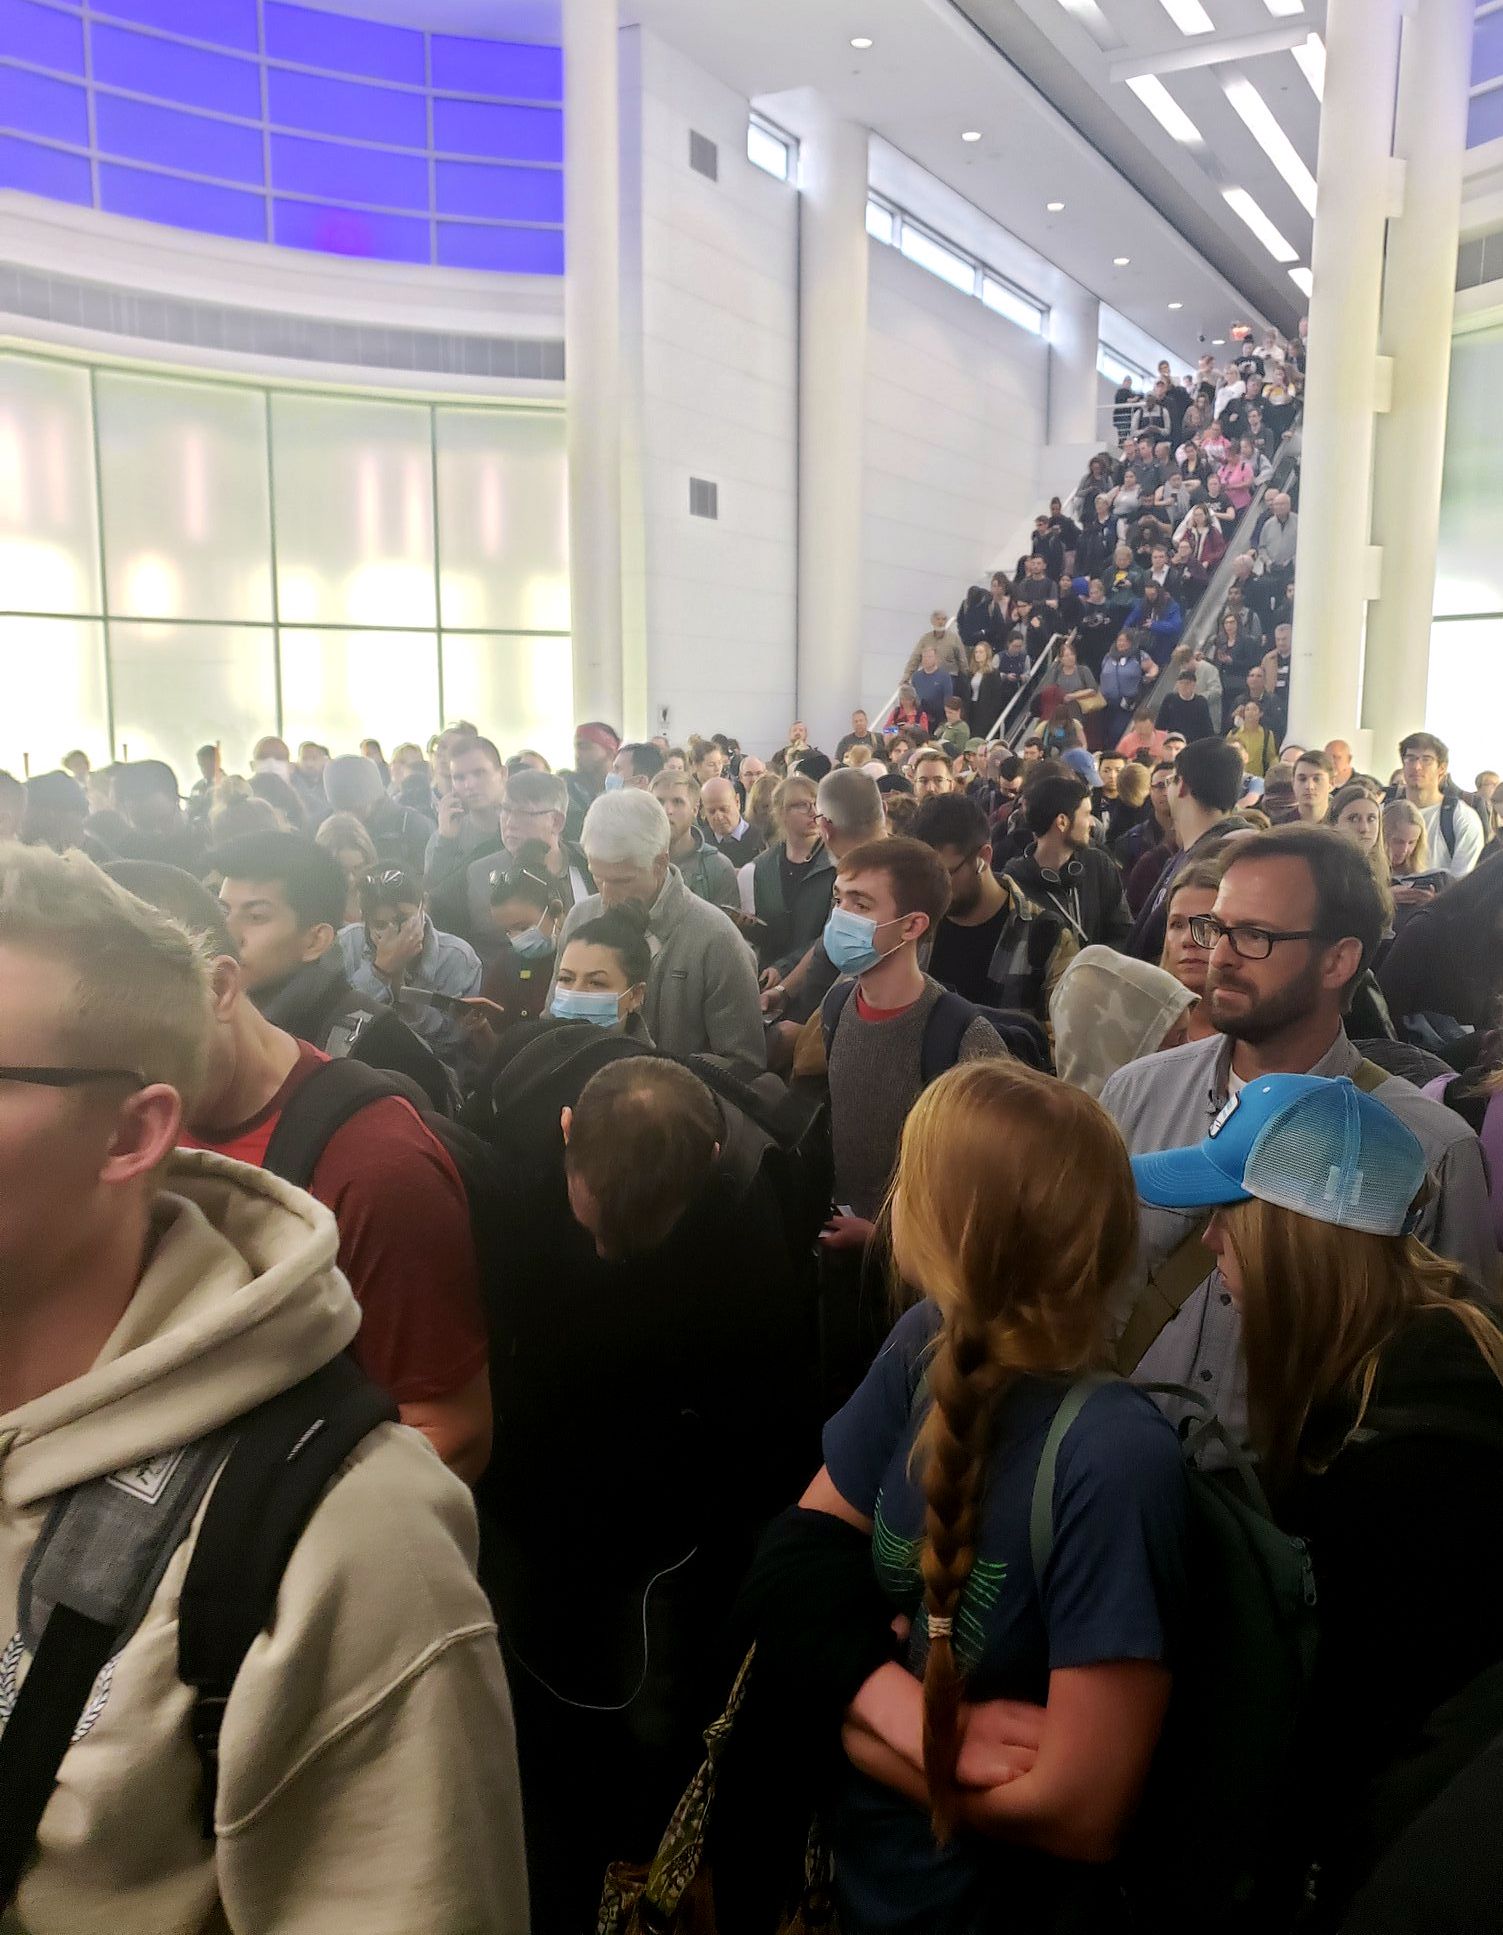 people in crowd at airport